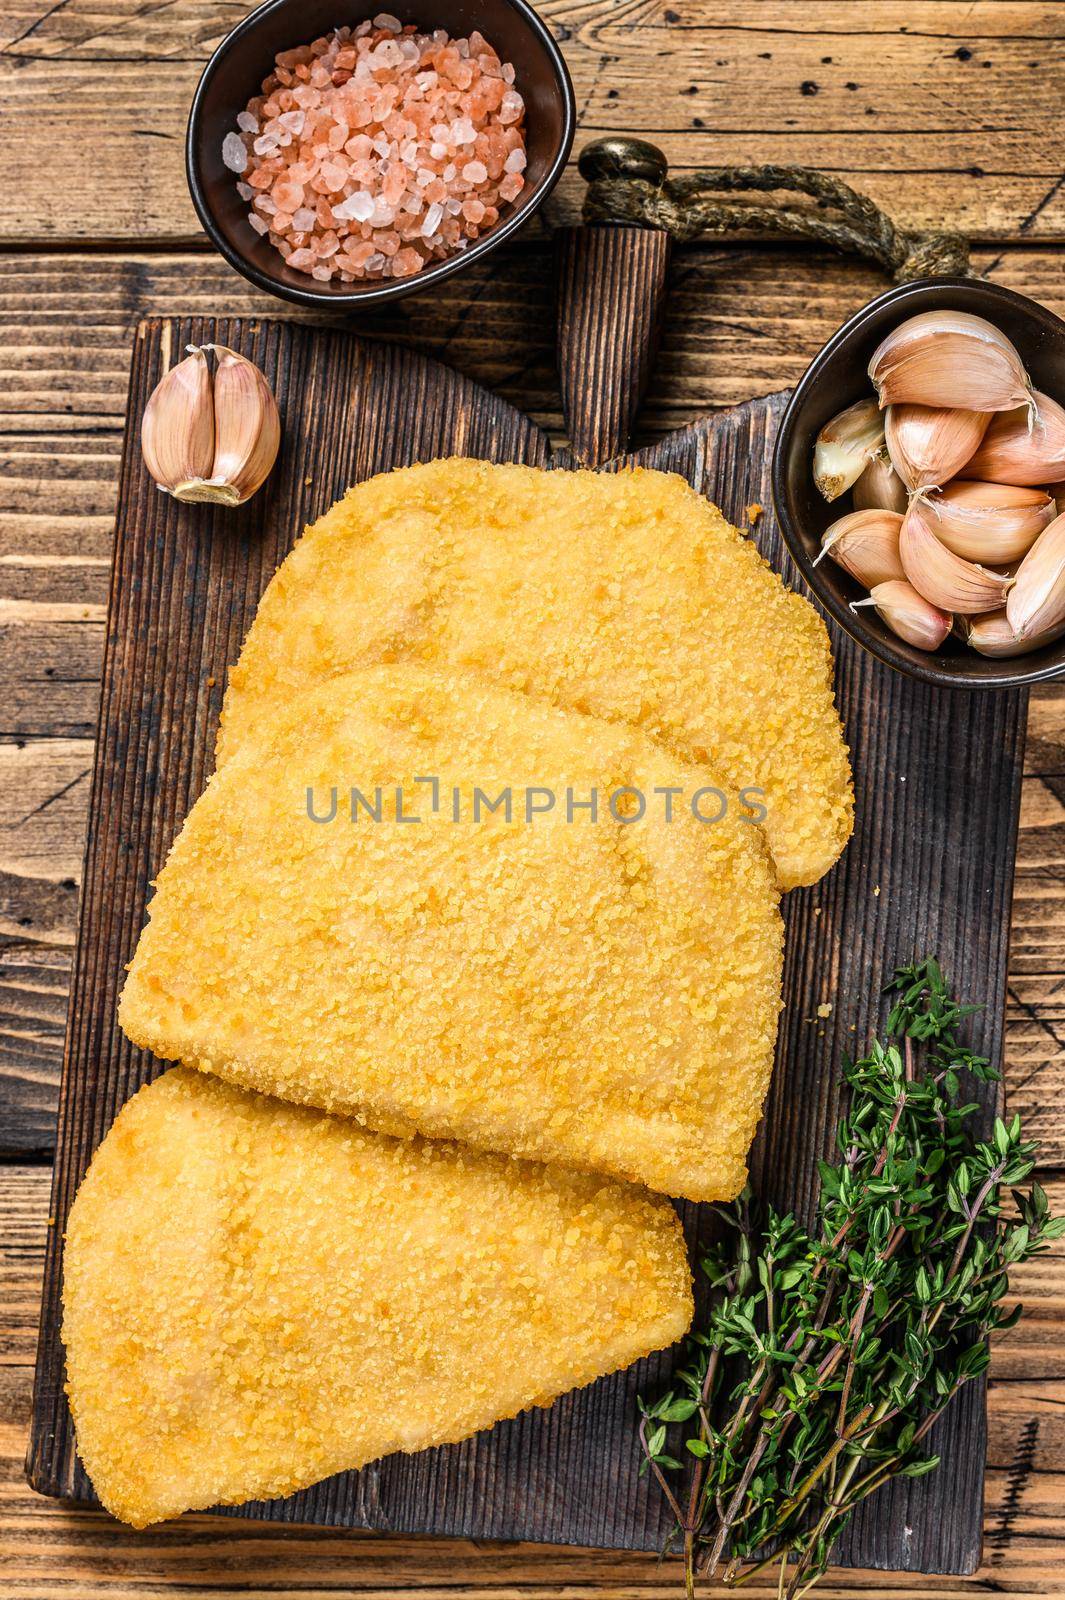 Cordon bleu meat cutlets with bread crumbs on a wooden board. wooden background. Top view.